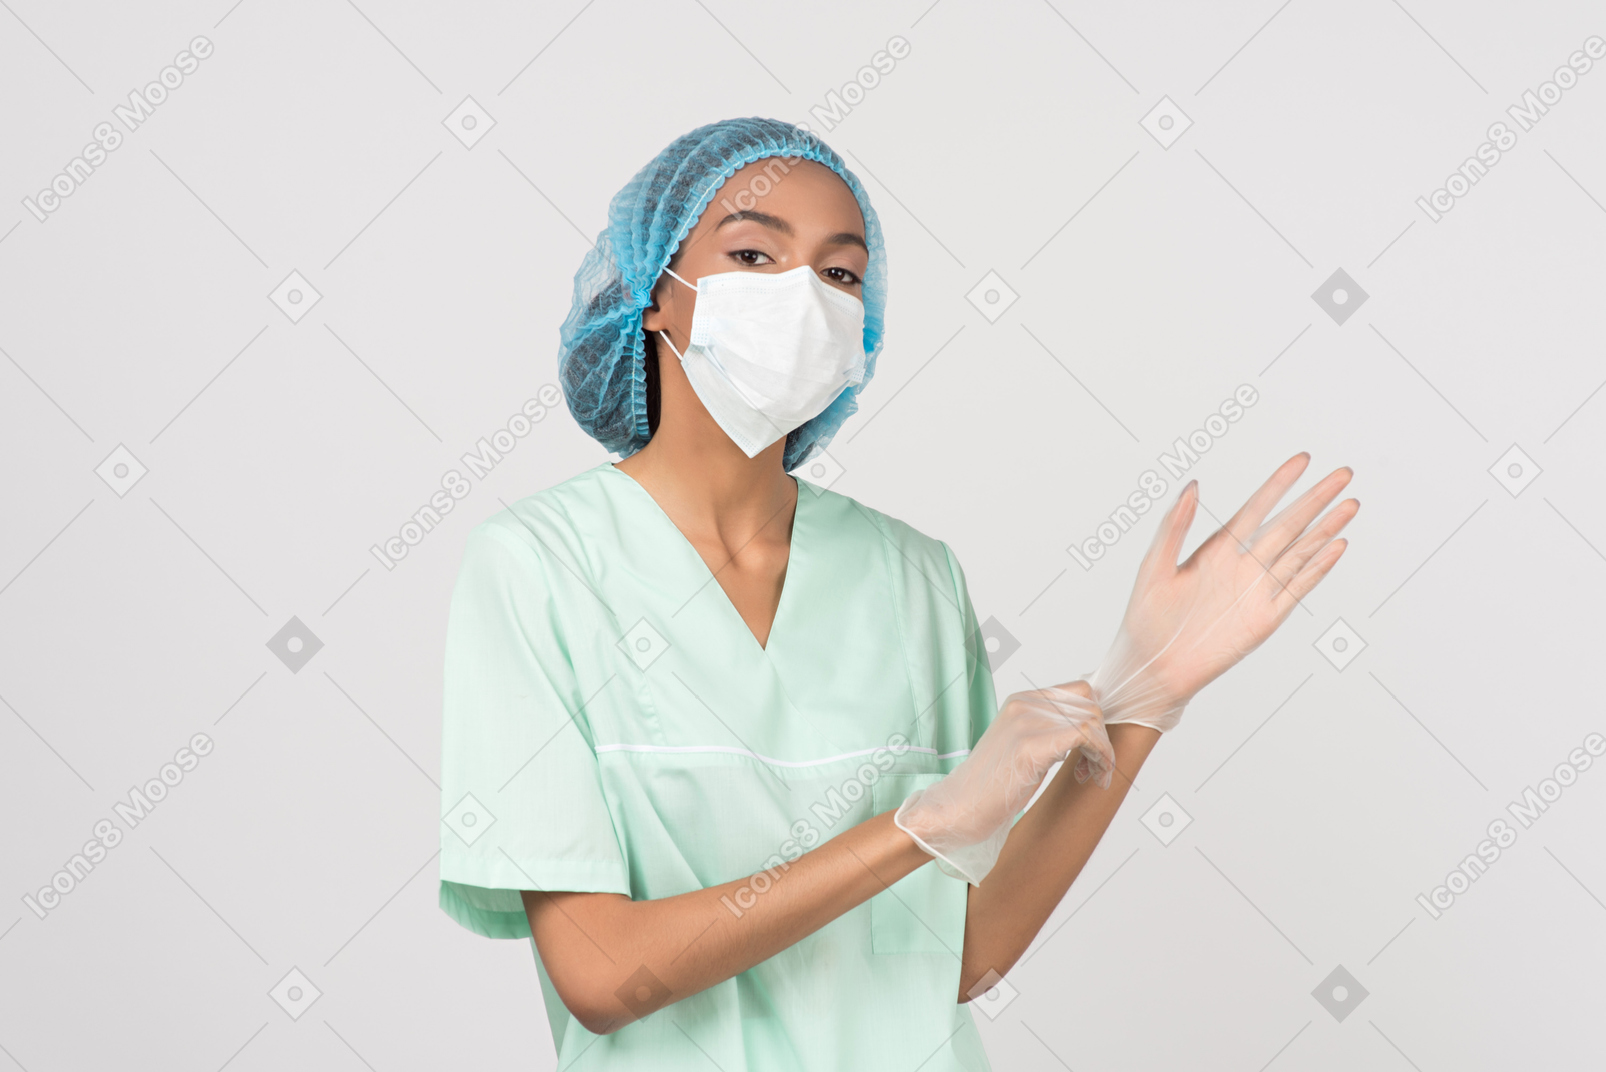 A young woman in a surgical hat and a face mask putting on gloves